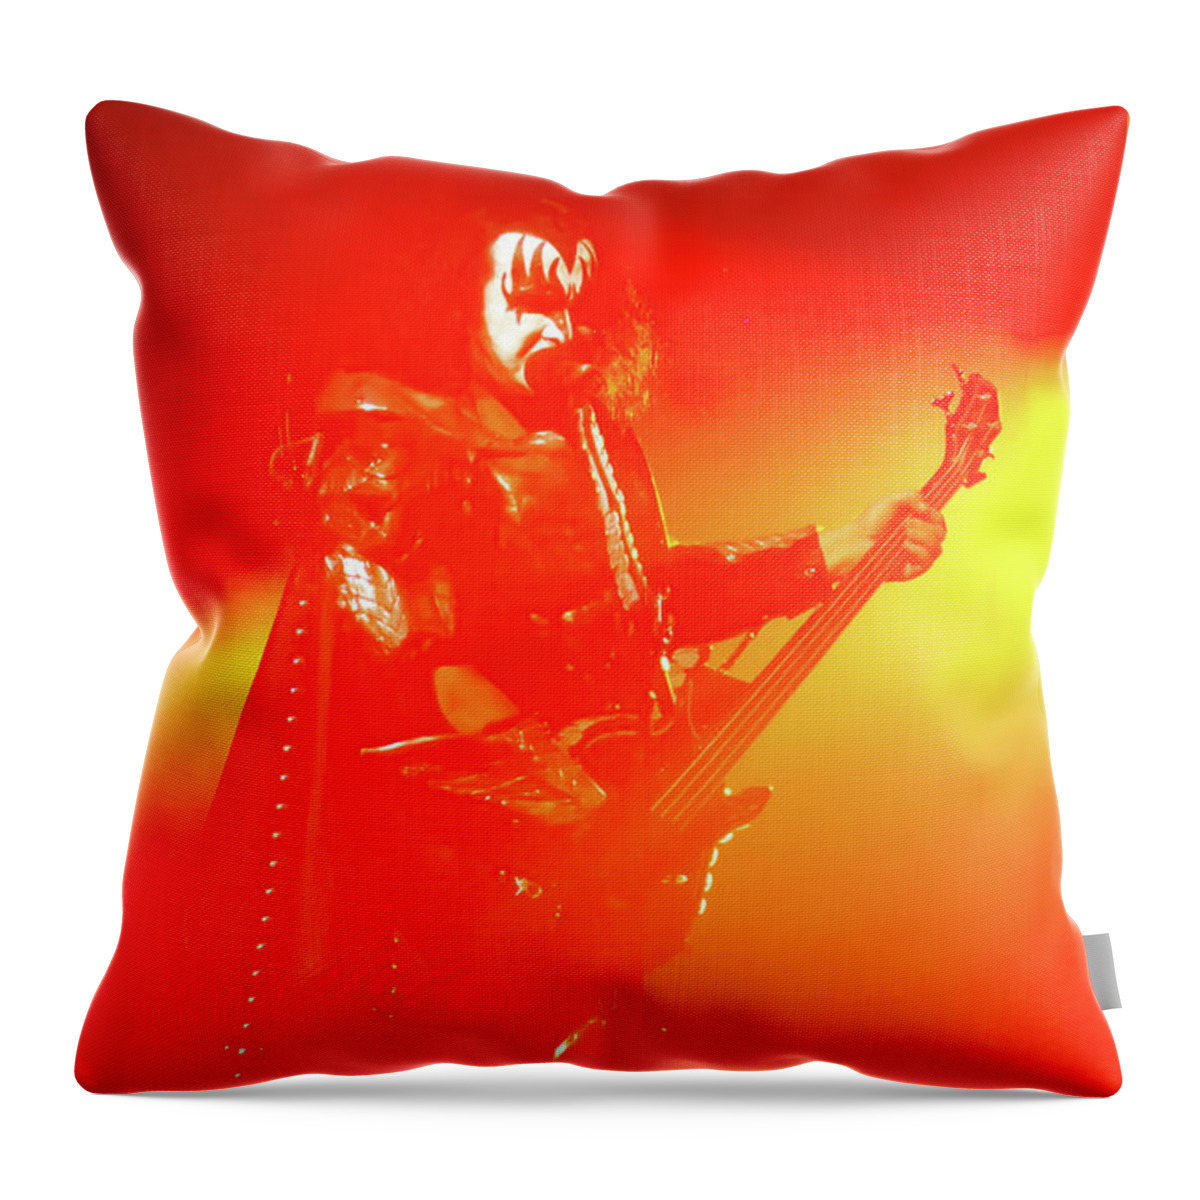 Kiss Rock Band Throw Pillow featuring the photograph Kiss Gene Simmons Concert Photo by The Rocker Chic